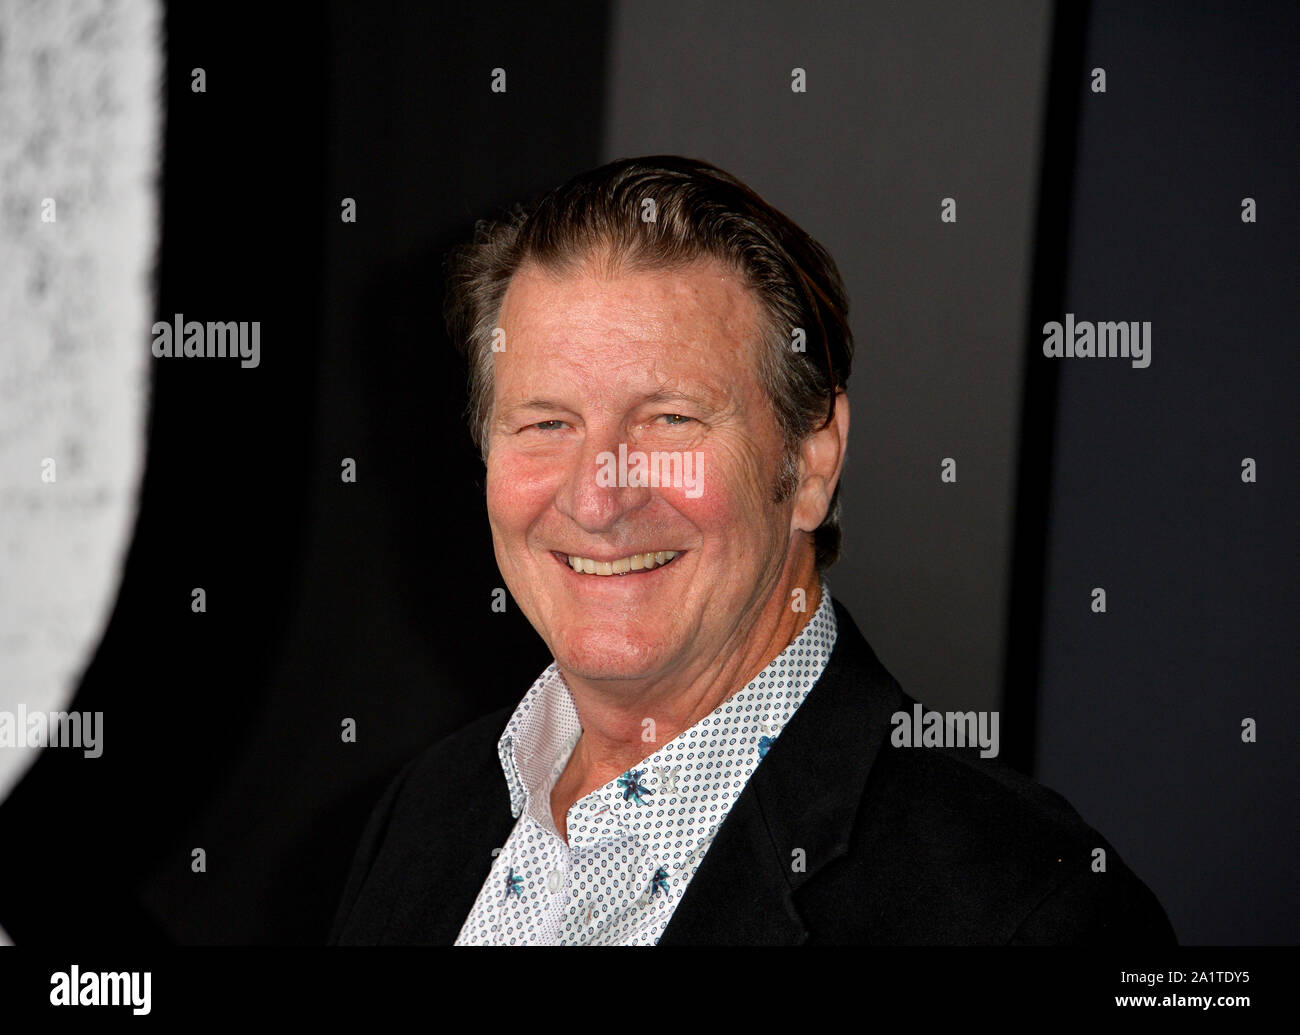 Los Angeles, USA. 29th Sep, 2019. Brett Cullen at the premiere of 'Joker' at the TCL Chinese Theatre, Hollywood. Credit: Paul Smith/Alamy Live News Stock Photo